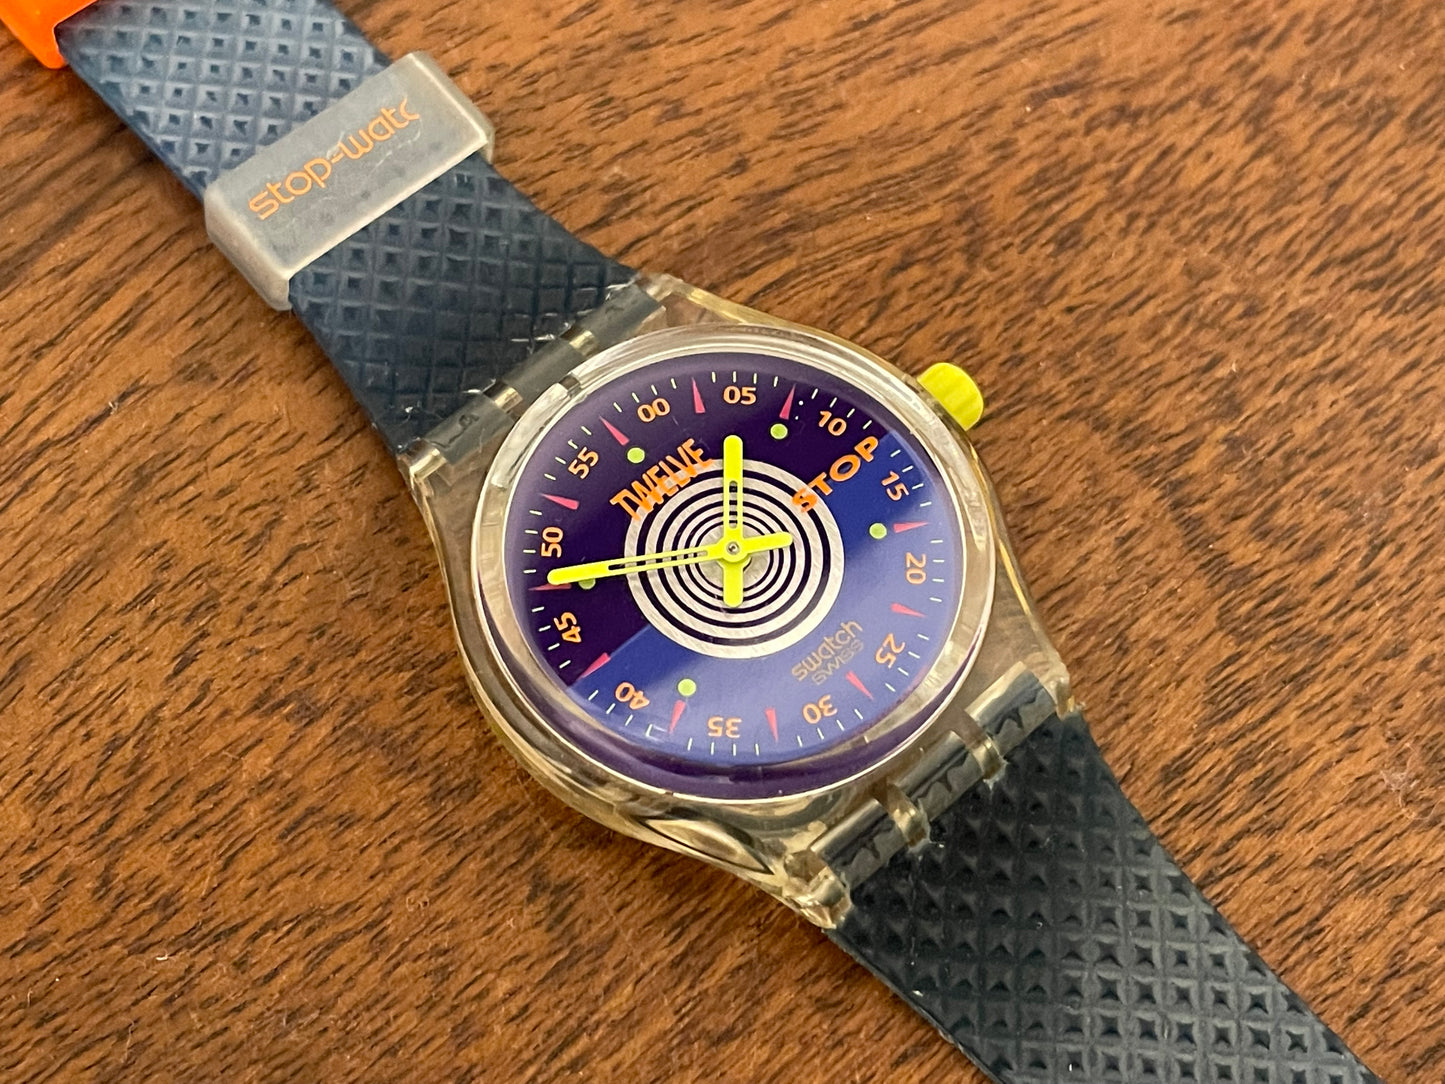 (1991) Swatch SSK101 stop-watch "Orologio" (serviced)